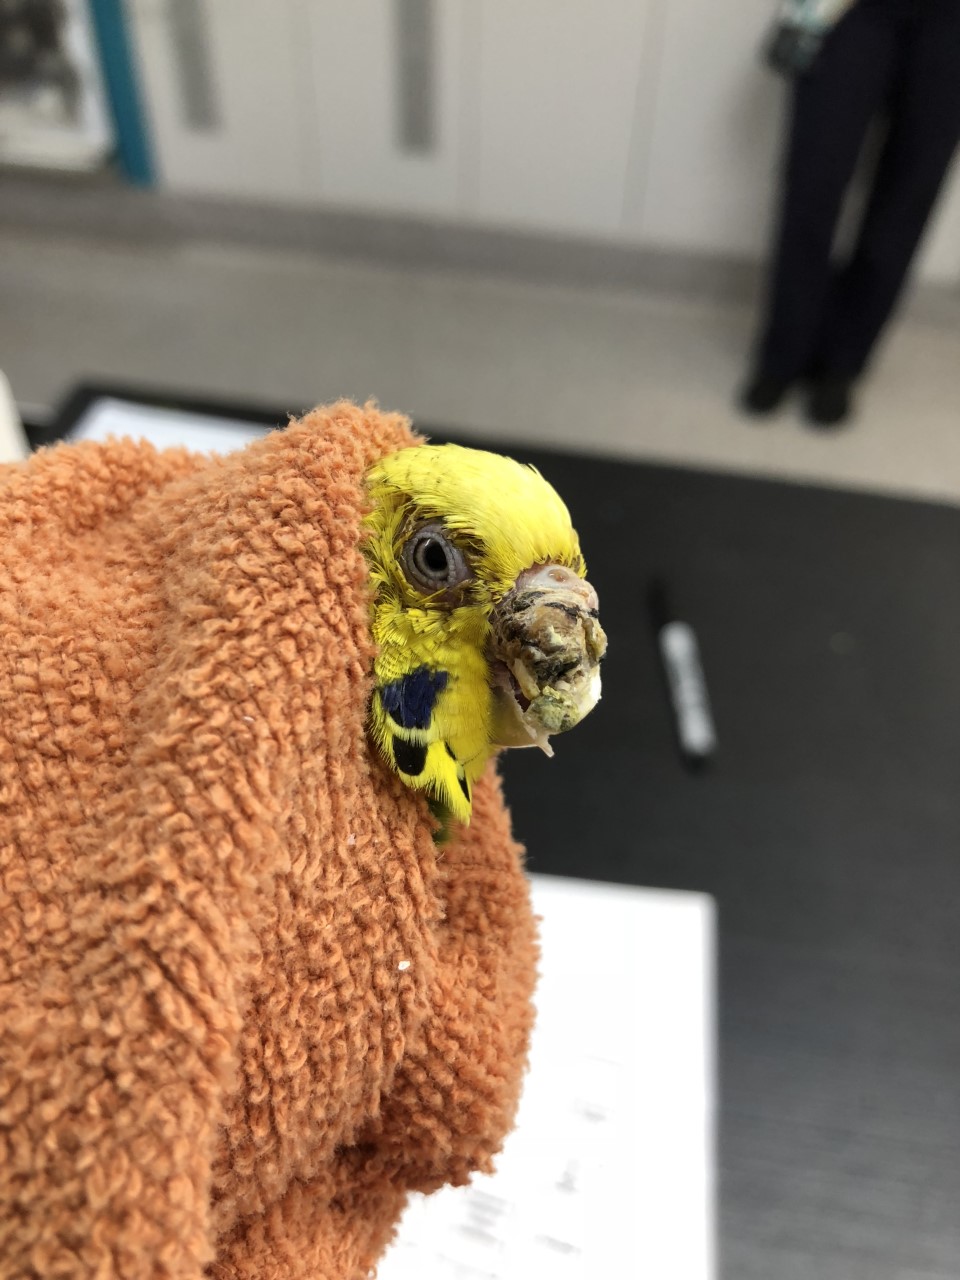 This budgie has a very abnormal beak – something that is easily determined with a thorough physical examination